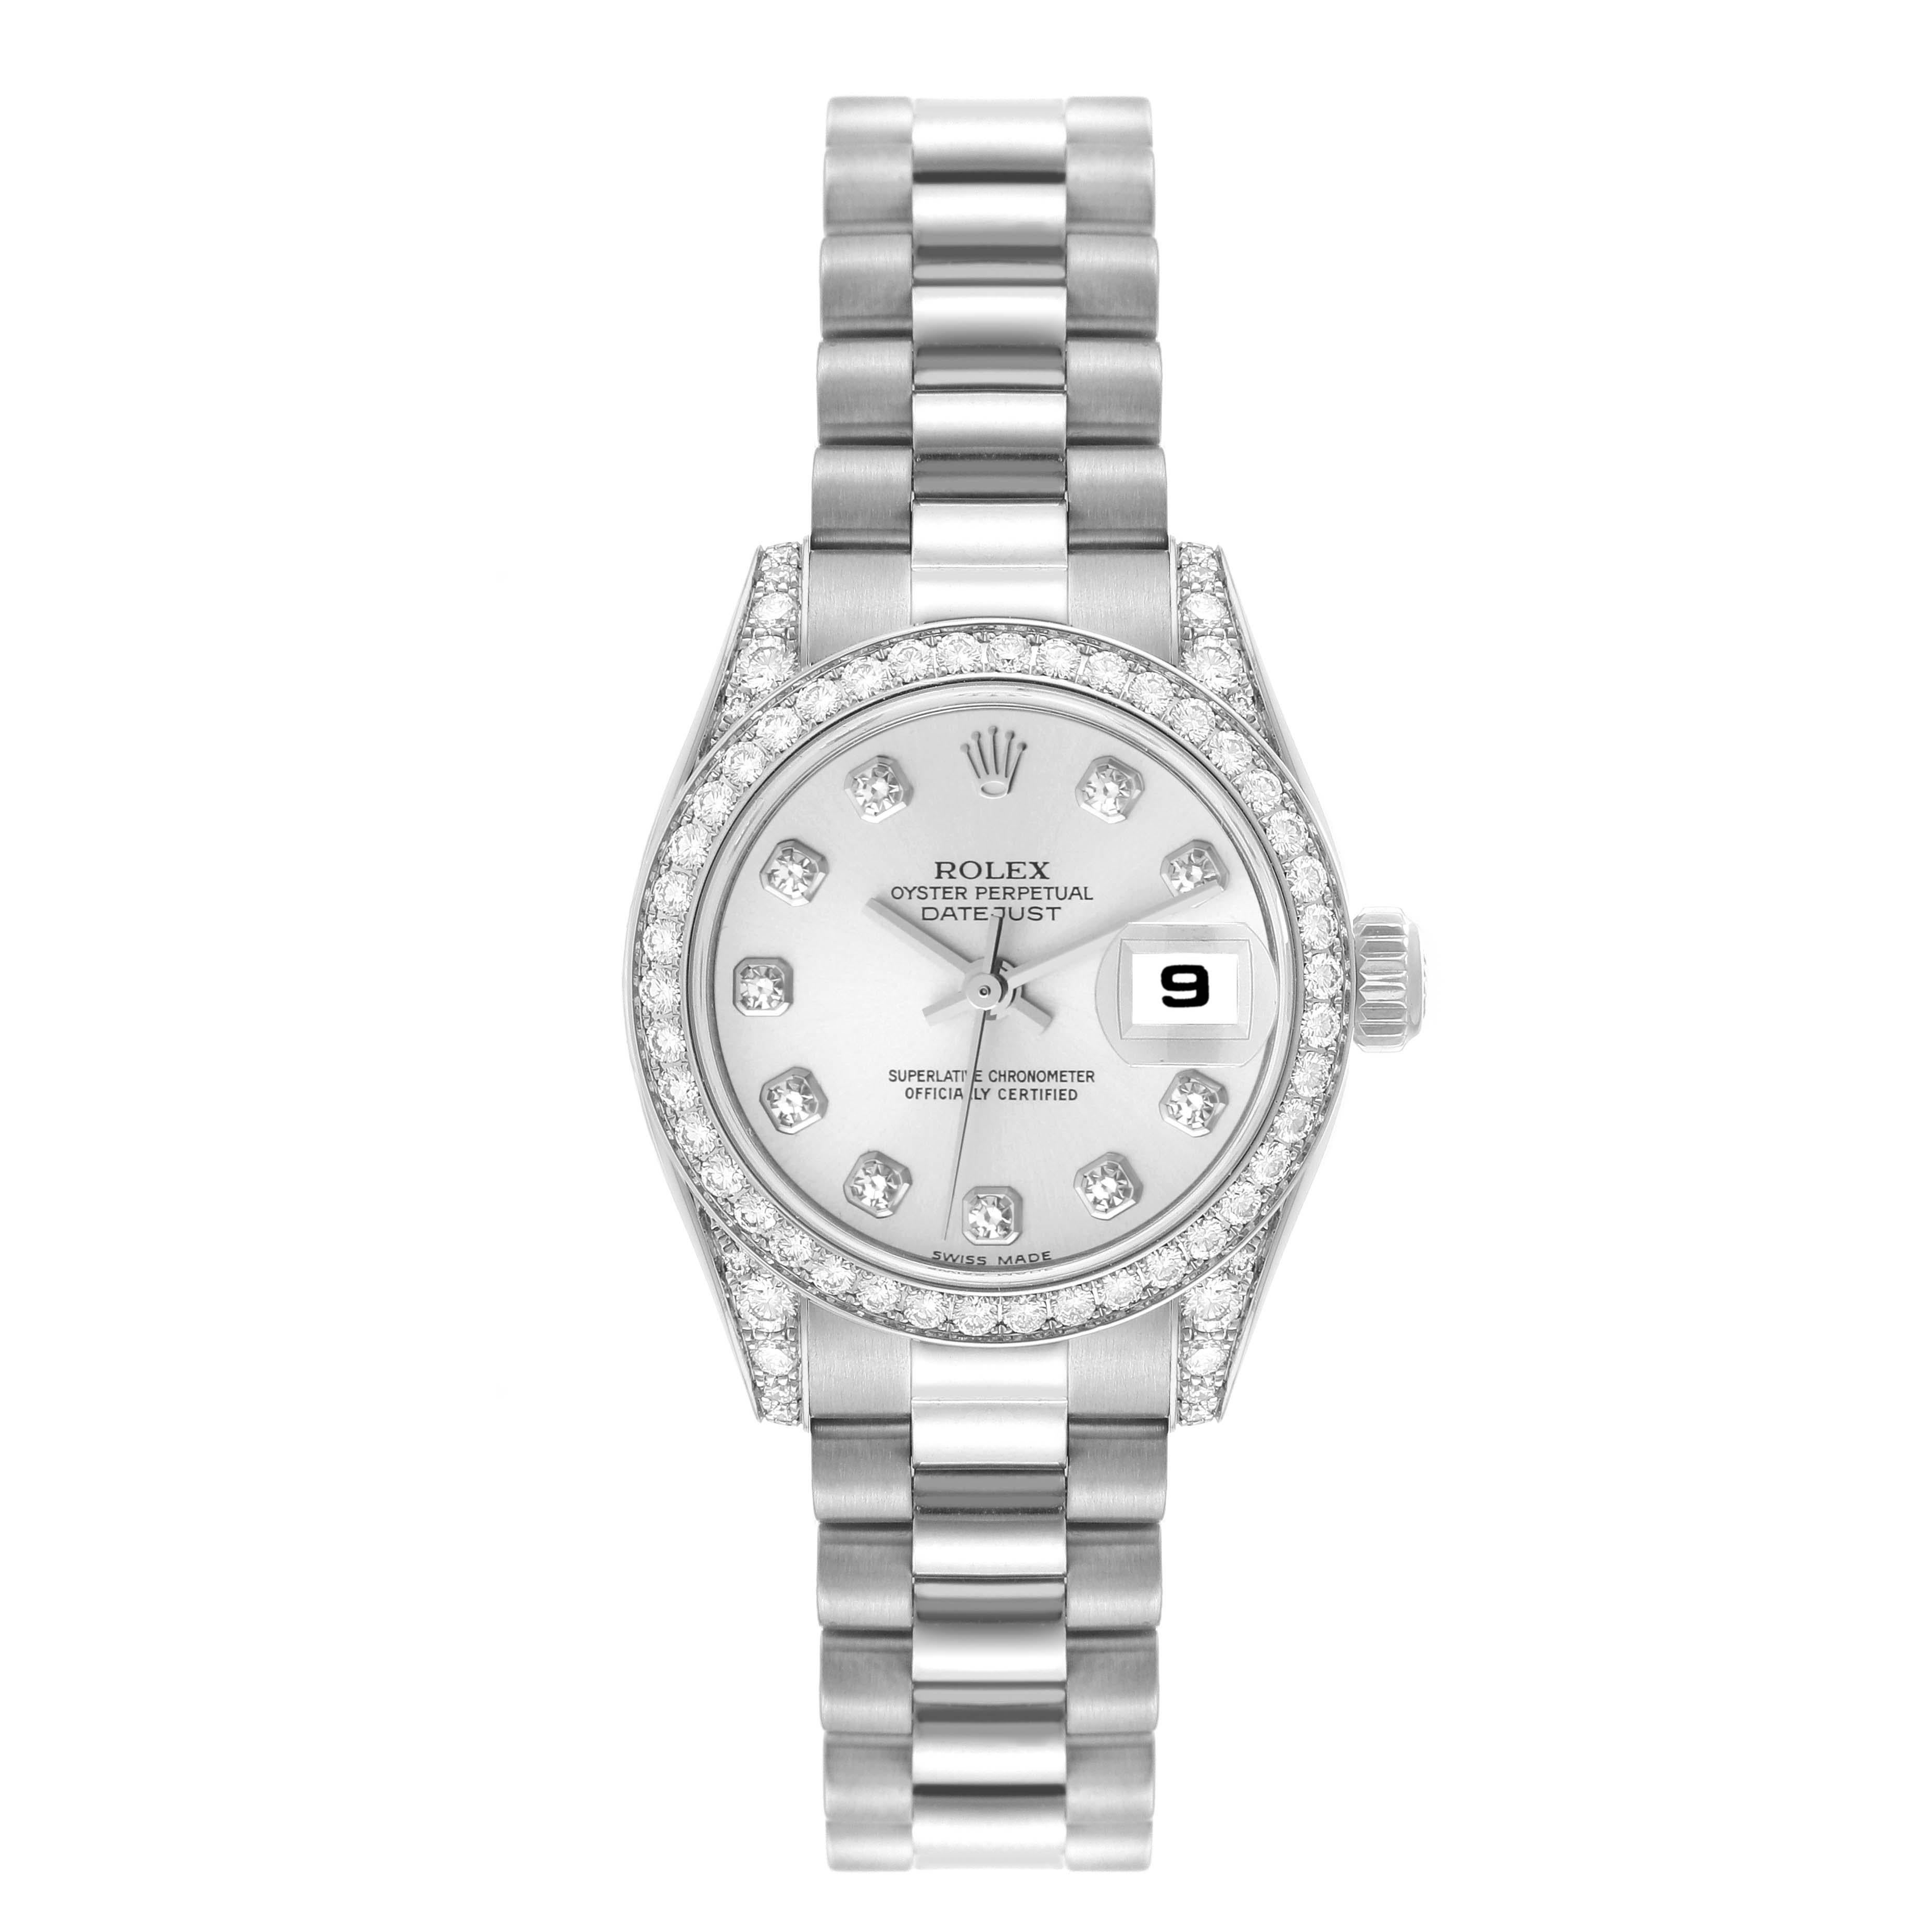 Rolex Datejust President White Gold Diamond Bezel Ladies Watch 179159 Box Papers For Sale 3